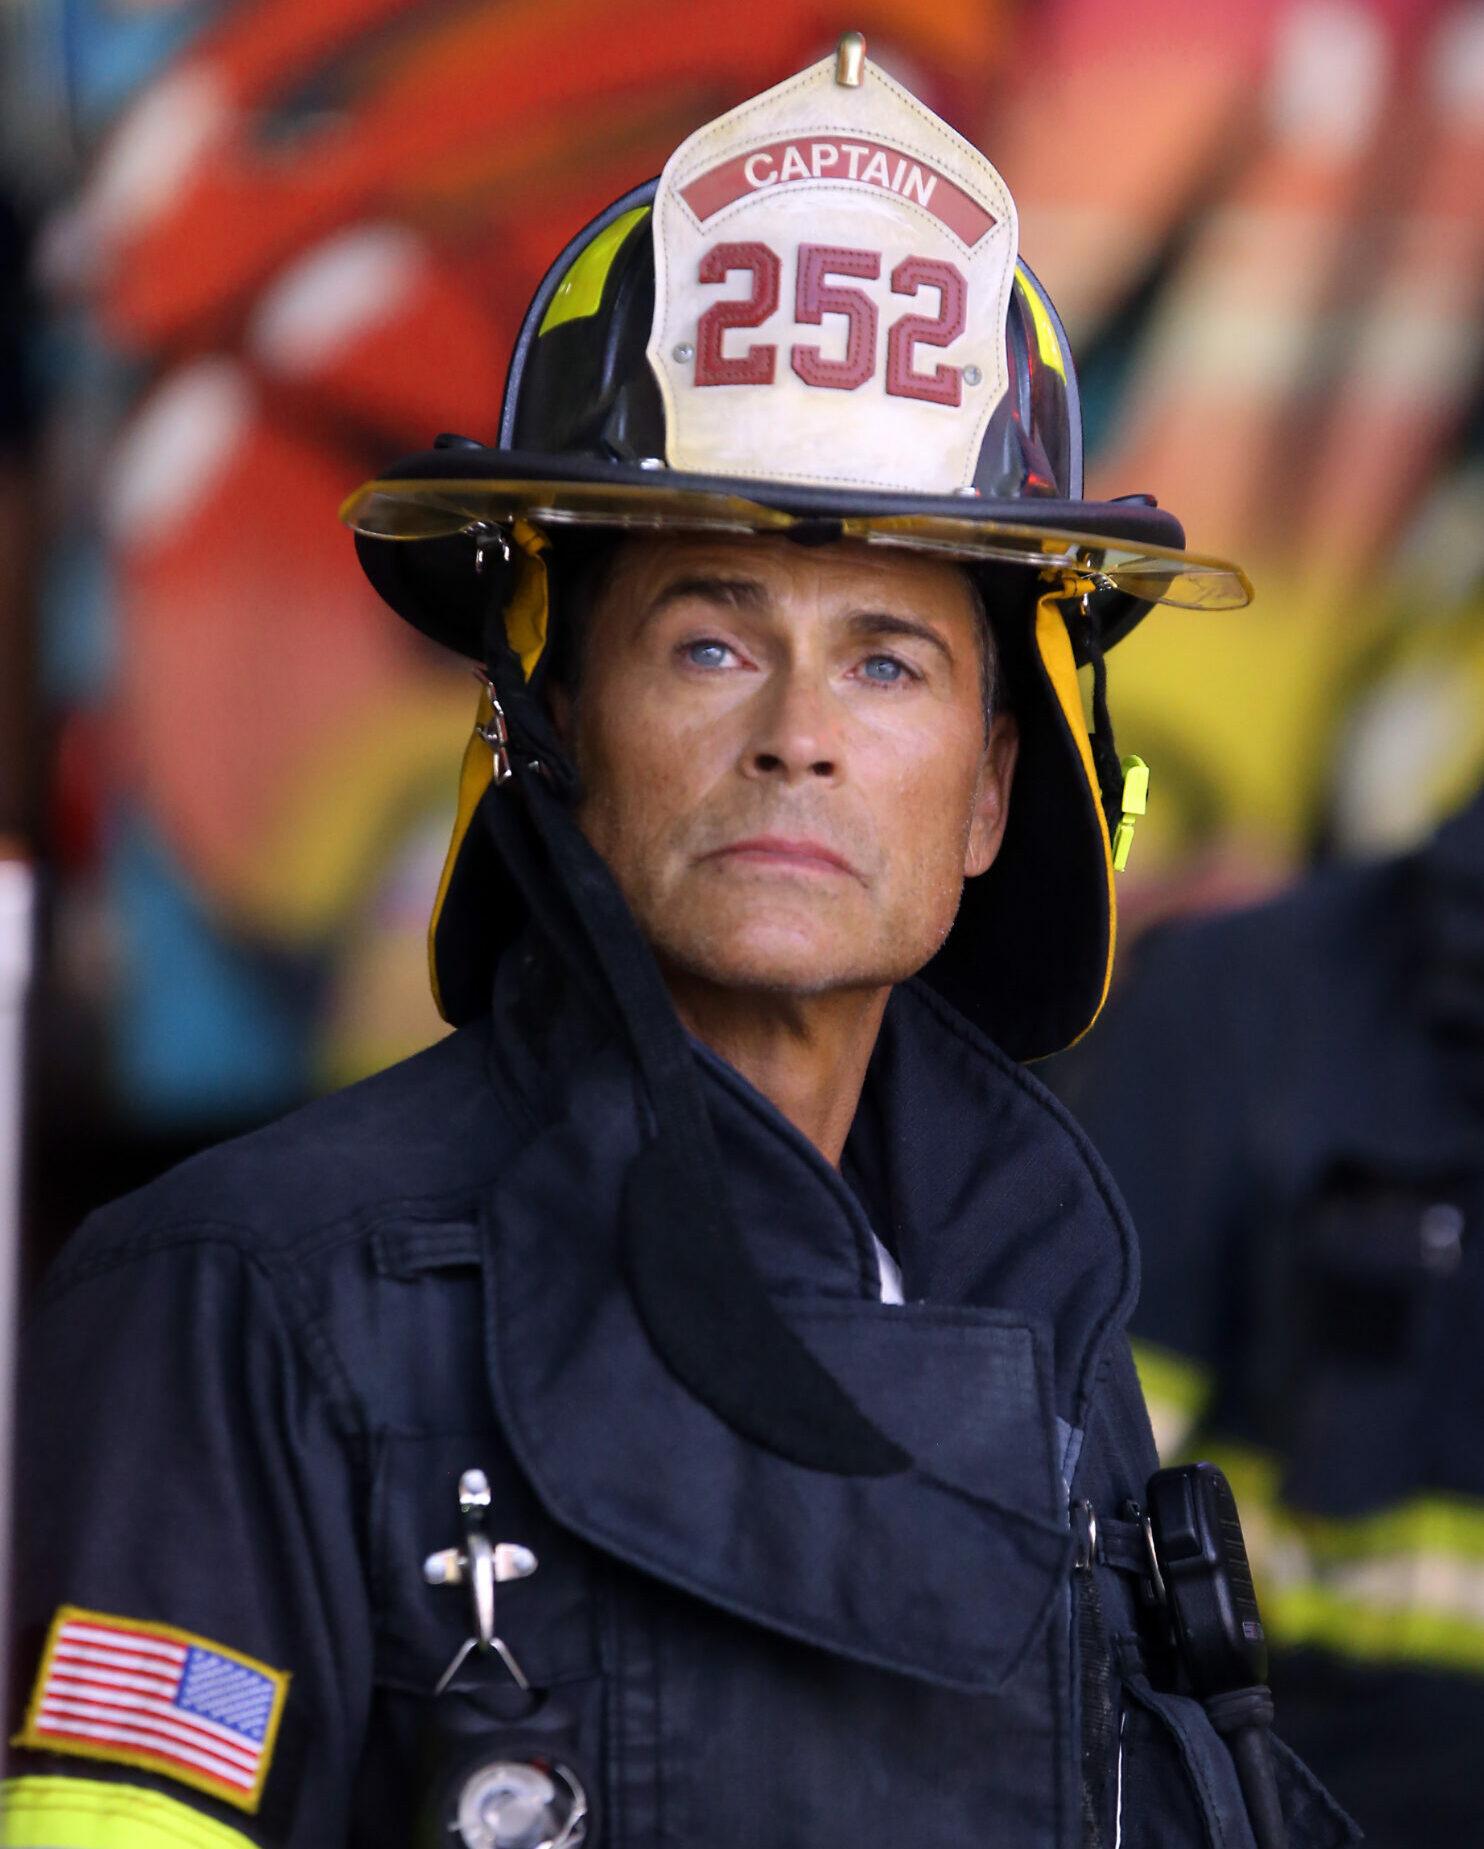 Rob Lowe plays a NYC fireman filming Fox's "911 Lone Star" in Times Square. 18 Sep 2019